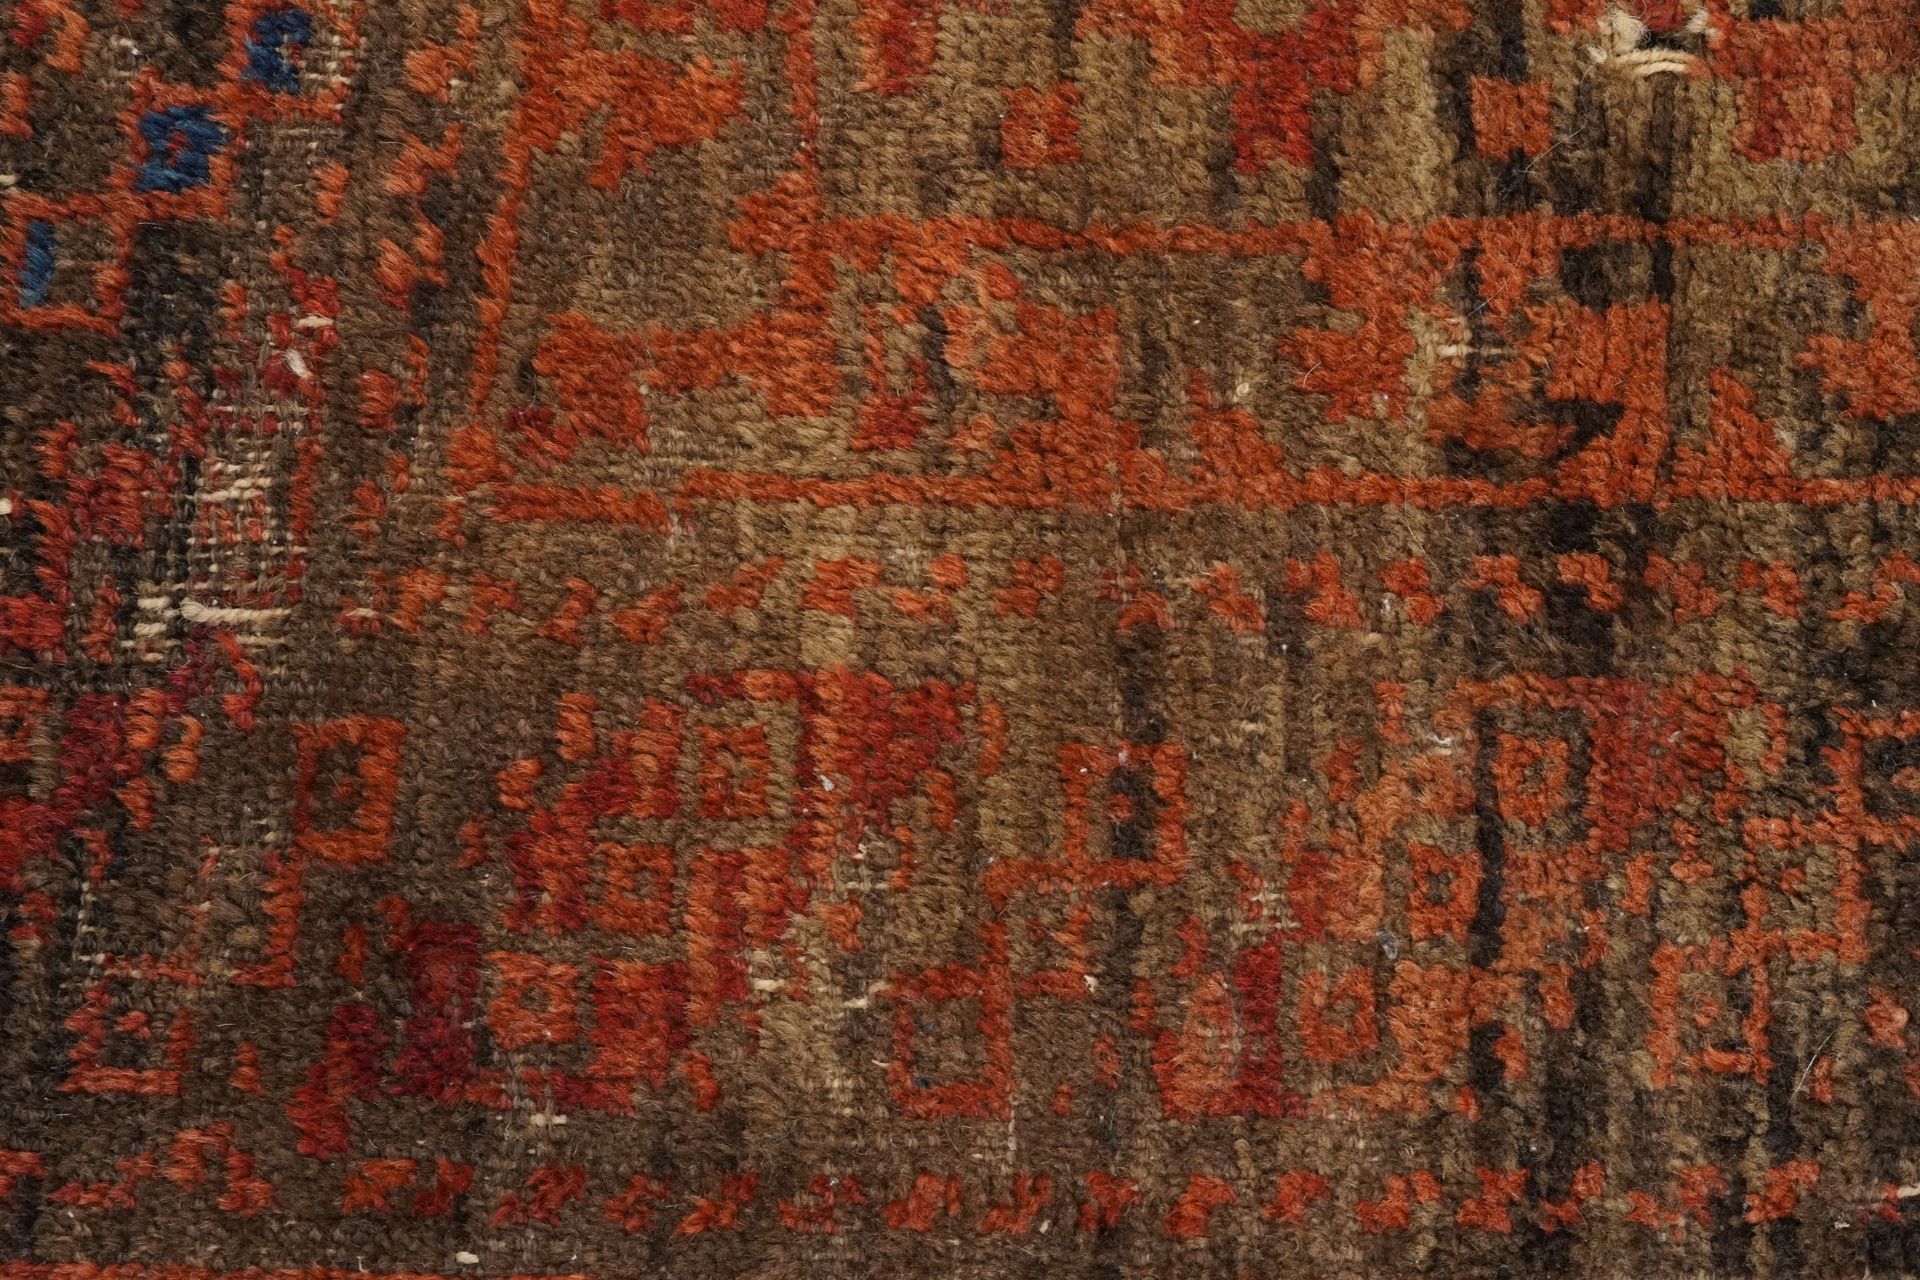 Antique Turkish carpet having an all over blue and red geometric design , 290cm x 206cm - Image 7 of 7